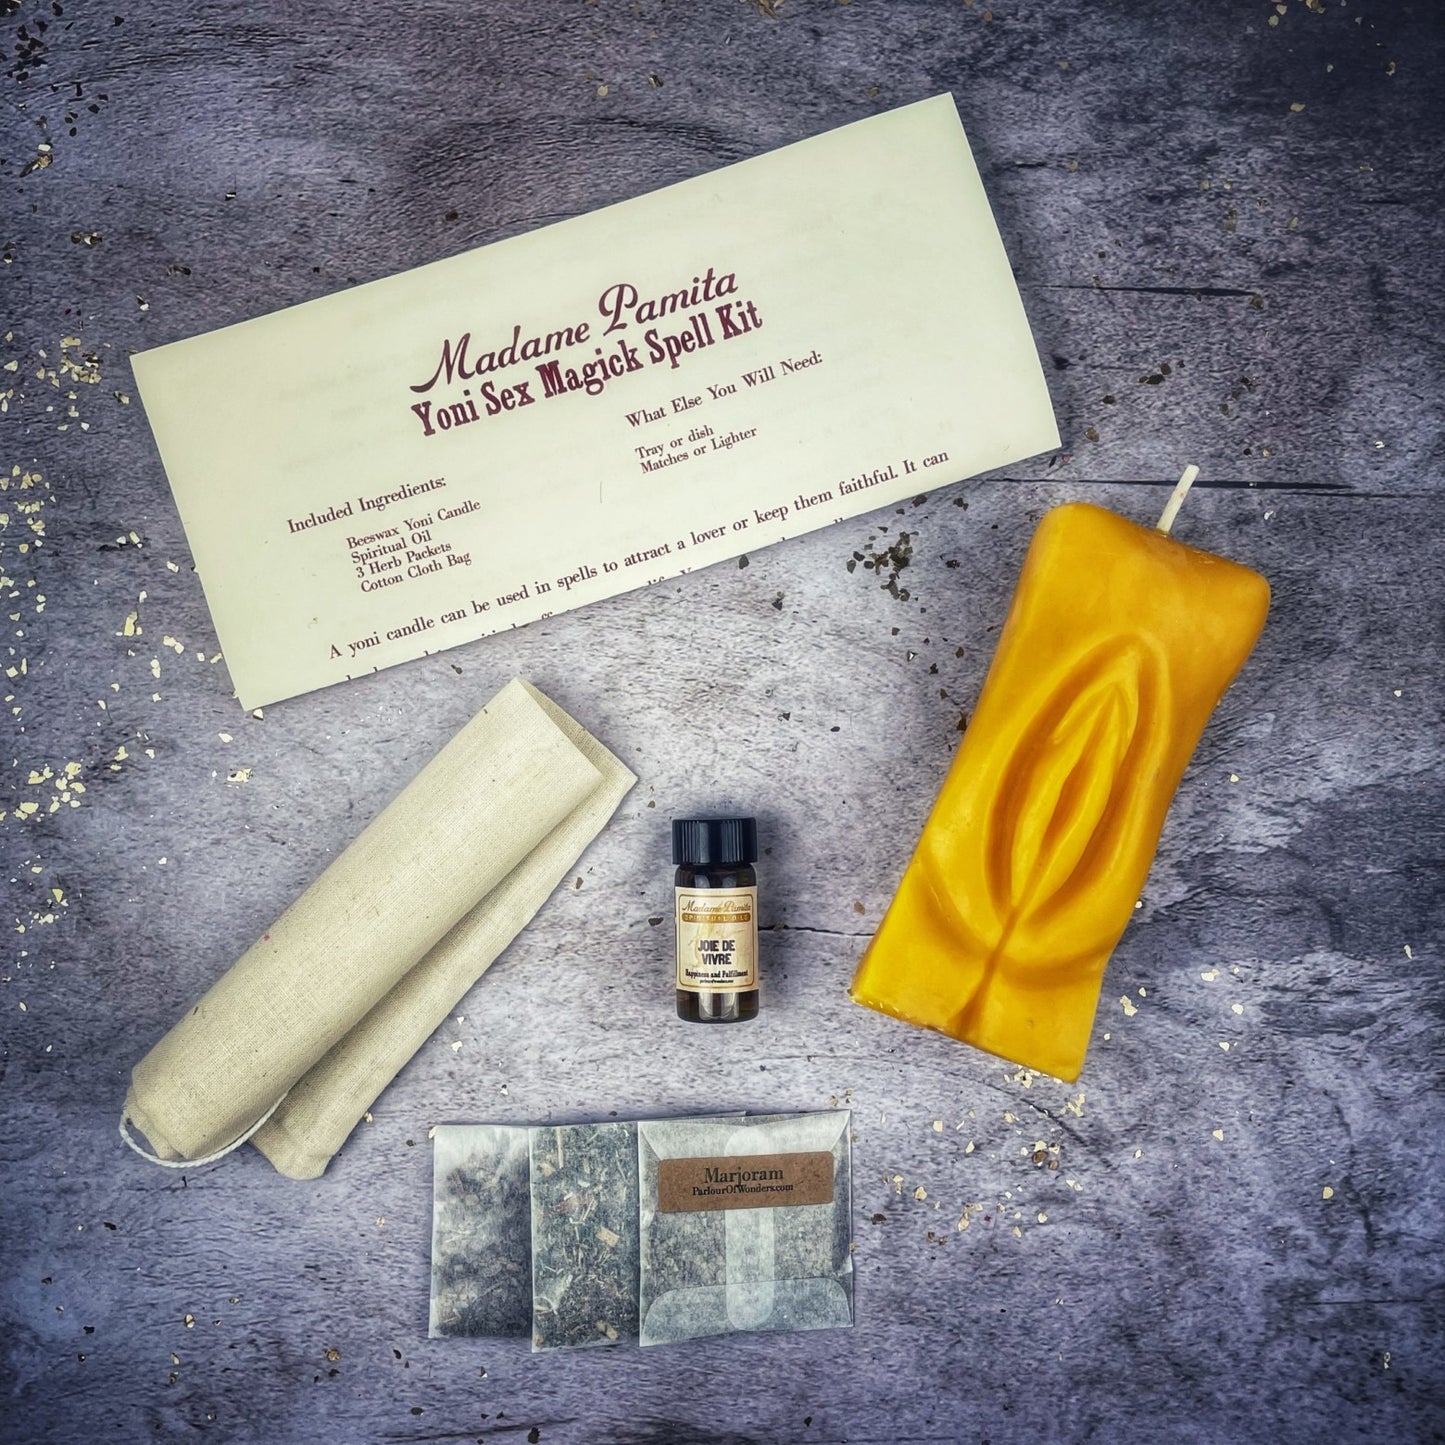 Yoni Sex Magick Candle Spell Kit